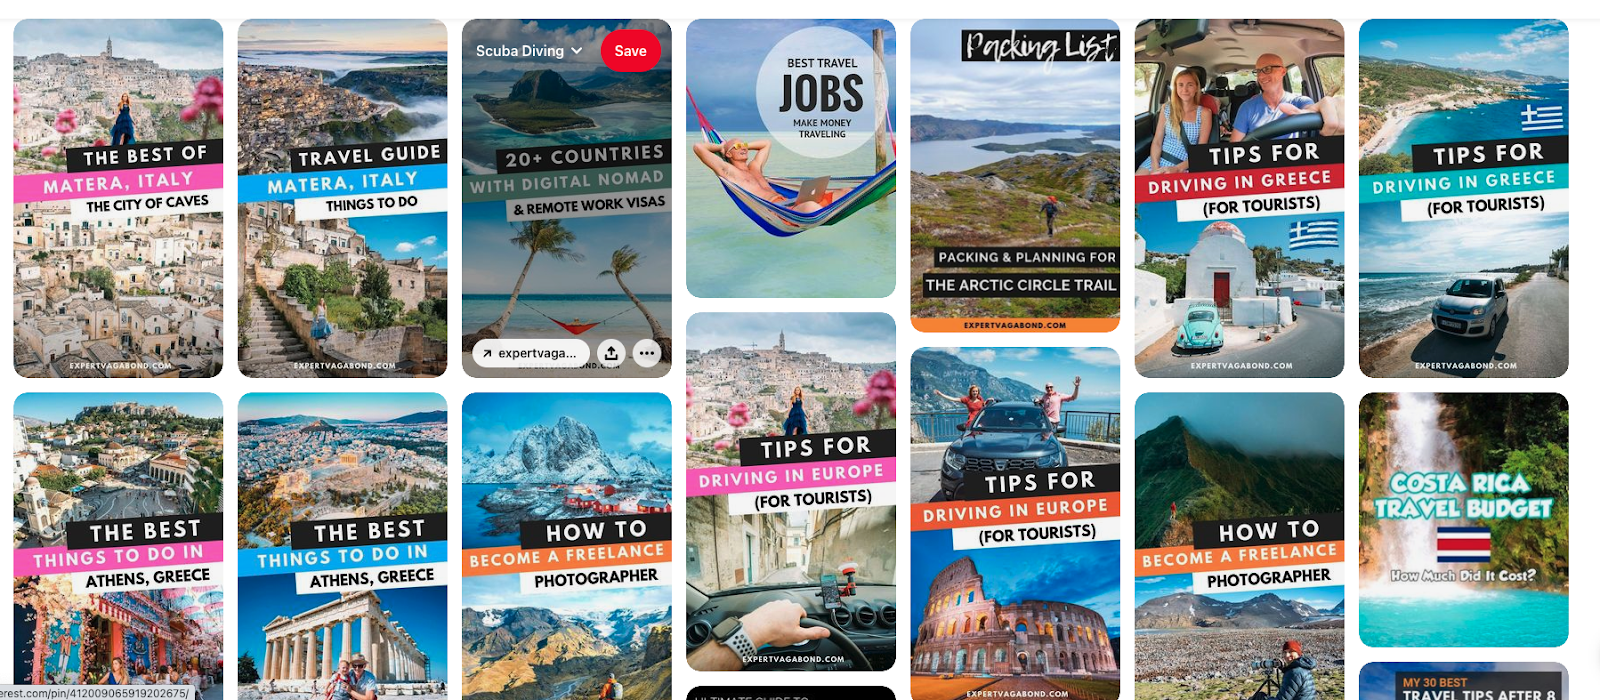 The image displays the content on the Pinterest Board of Expert Vagabond, a prominent travel blogger. The board exemplifies the power of visually appealing pins on an SEO-capable platform.